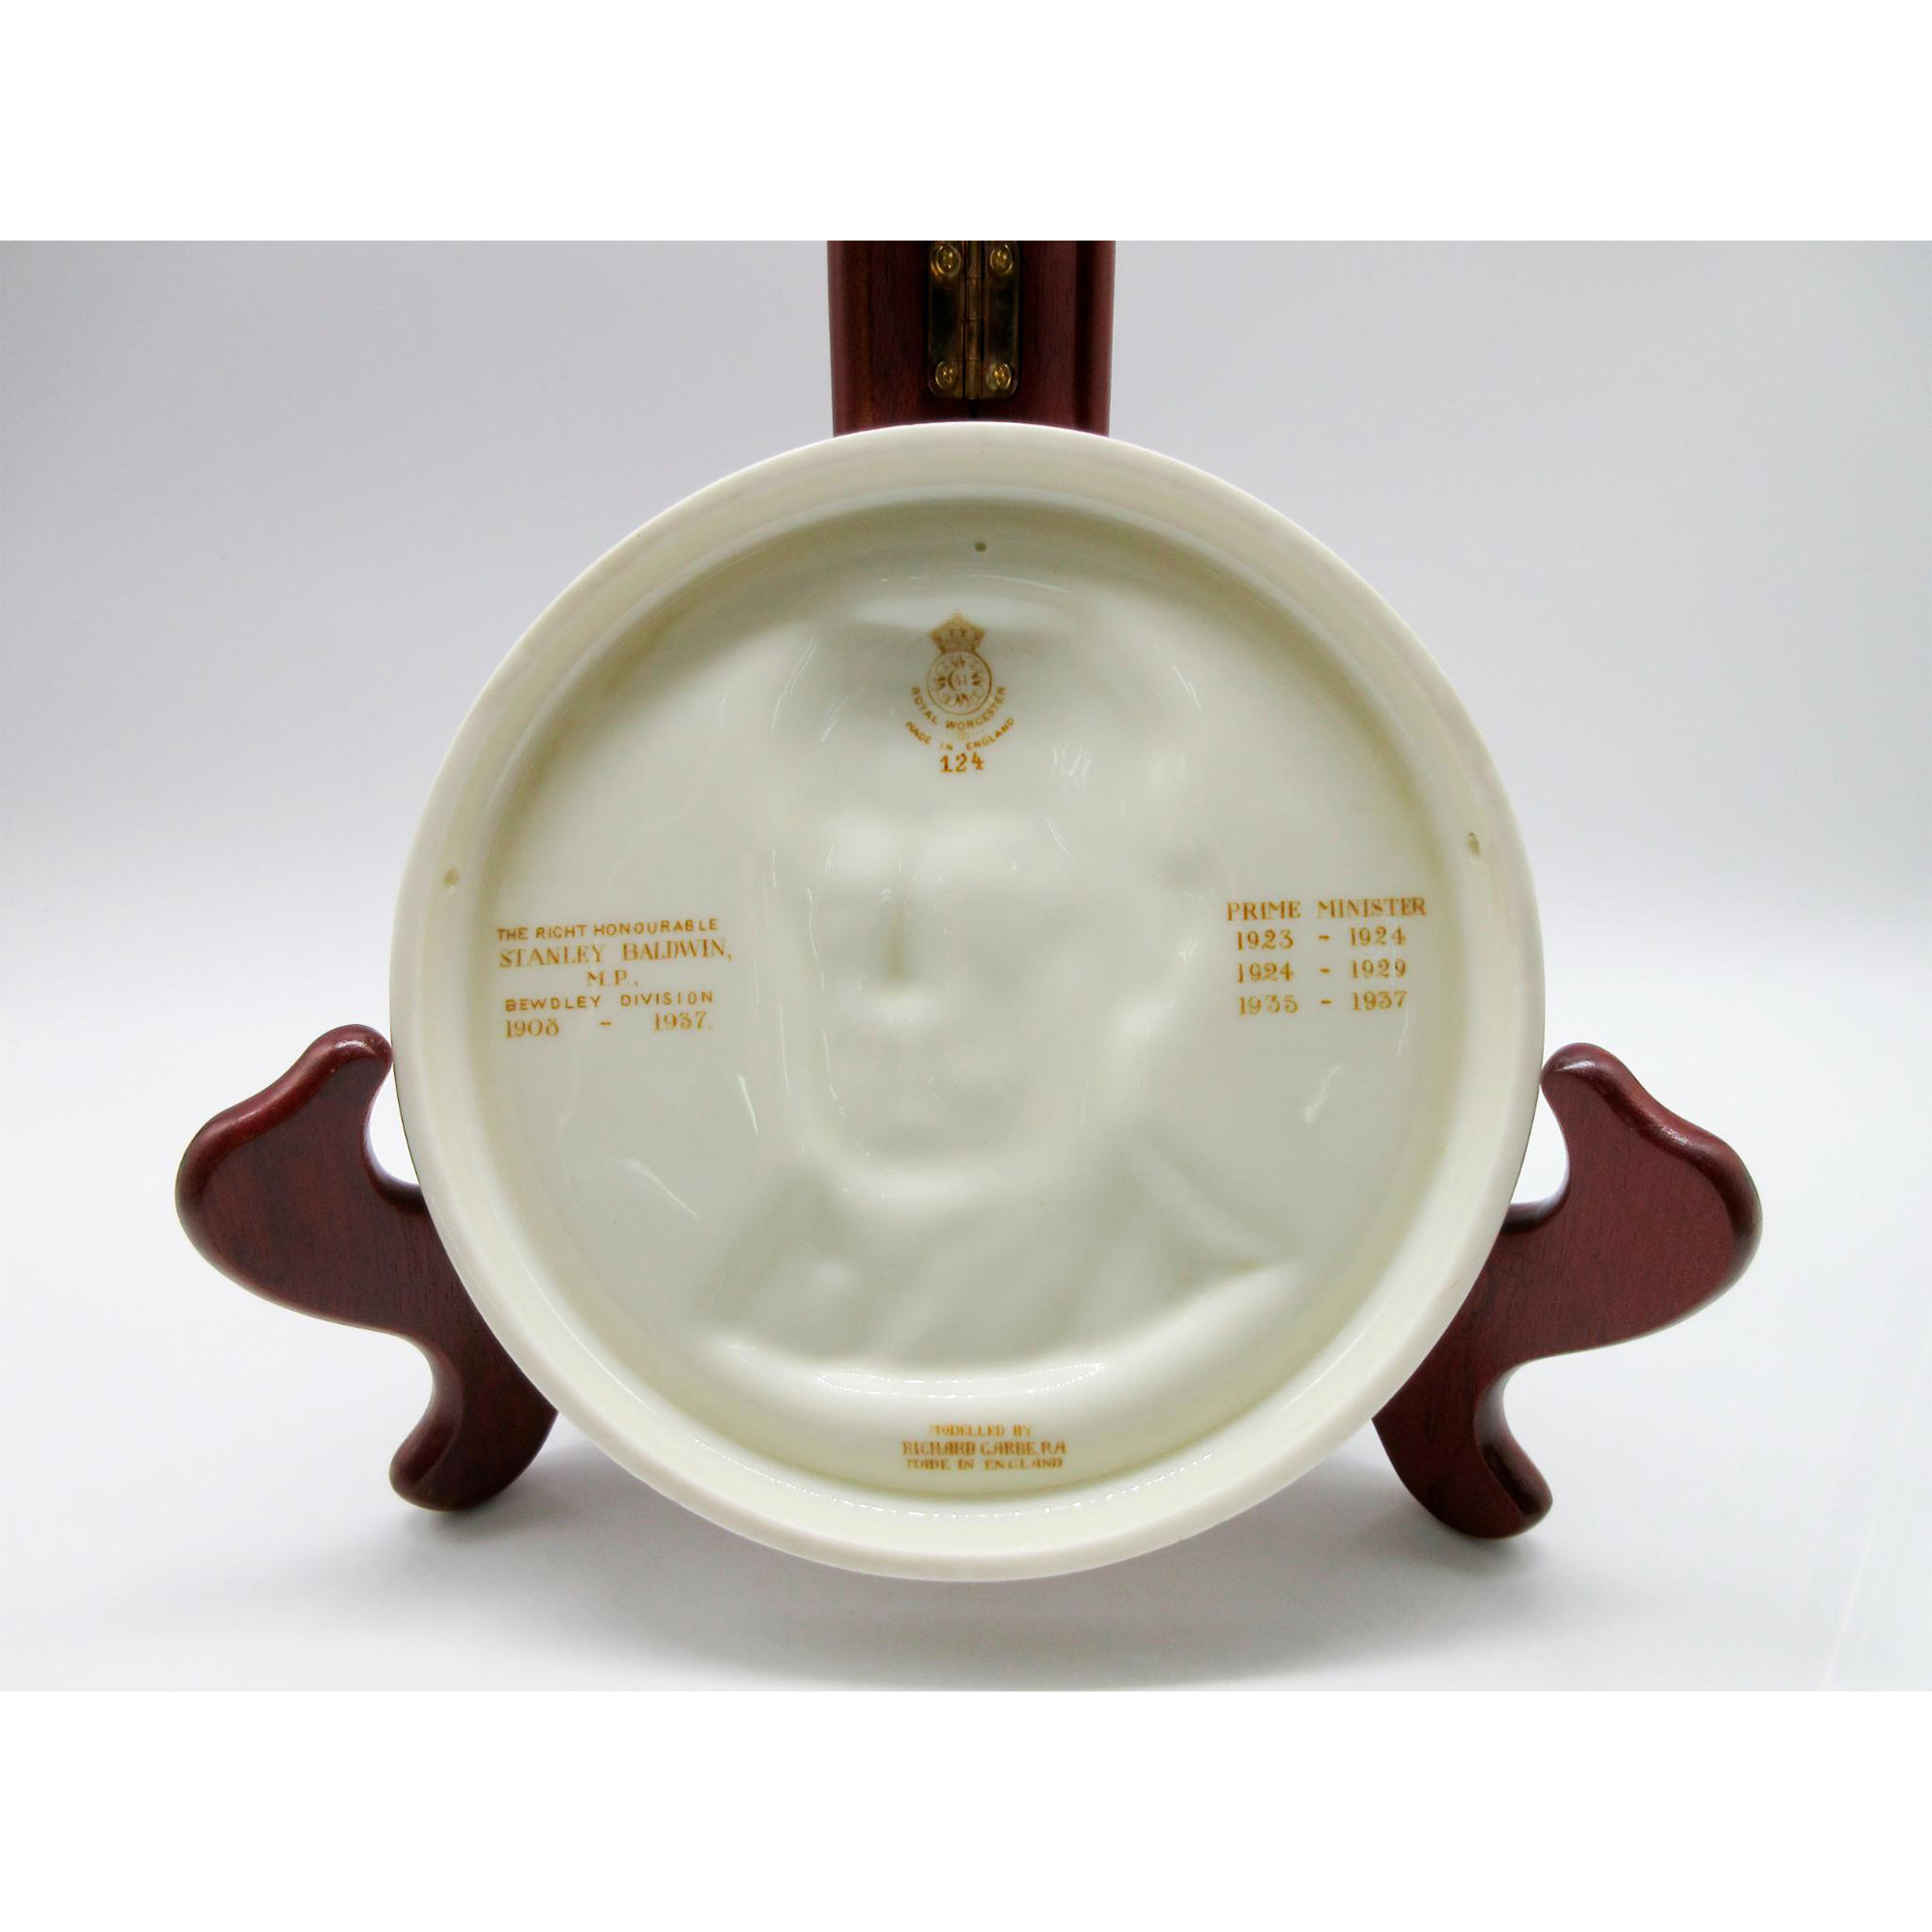 Royal Worcester Plaque by Richard Garbe of Stanley Baldwin - Image 2 of 2